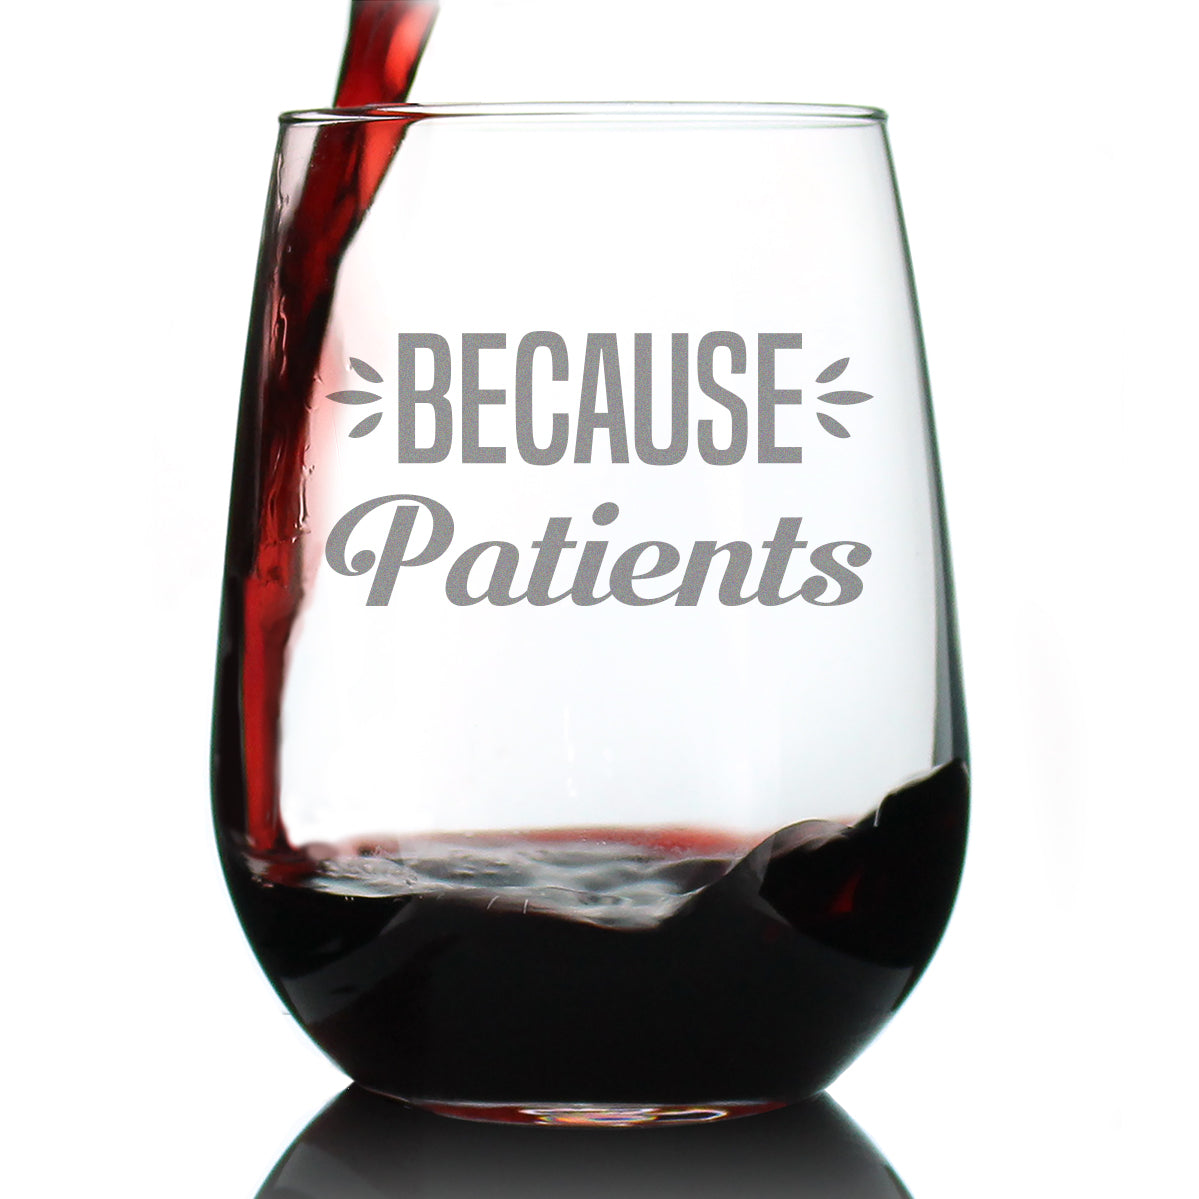 Because Patients Cute Stemless Wine Glass, Large 17 Ounce Size, Etched Sayings, Funny Gift for Medical Doctors, Nurses, Therapists